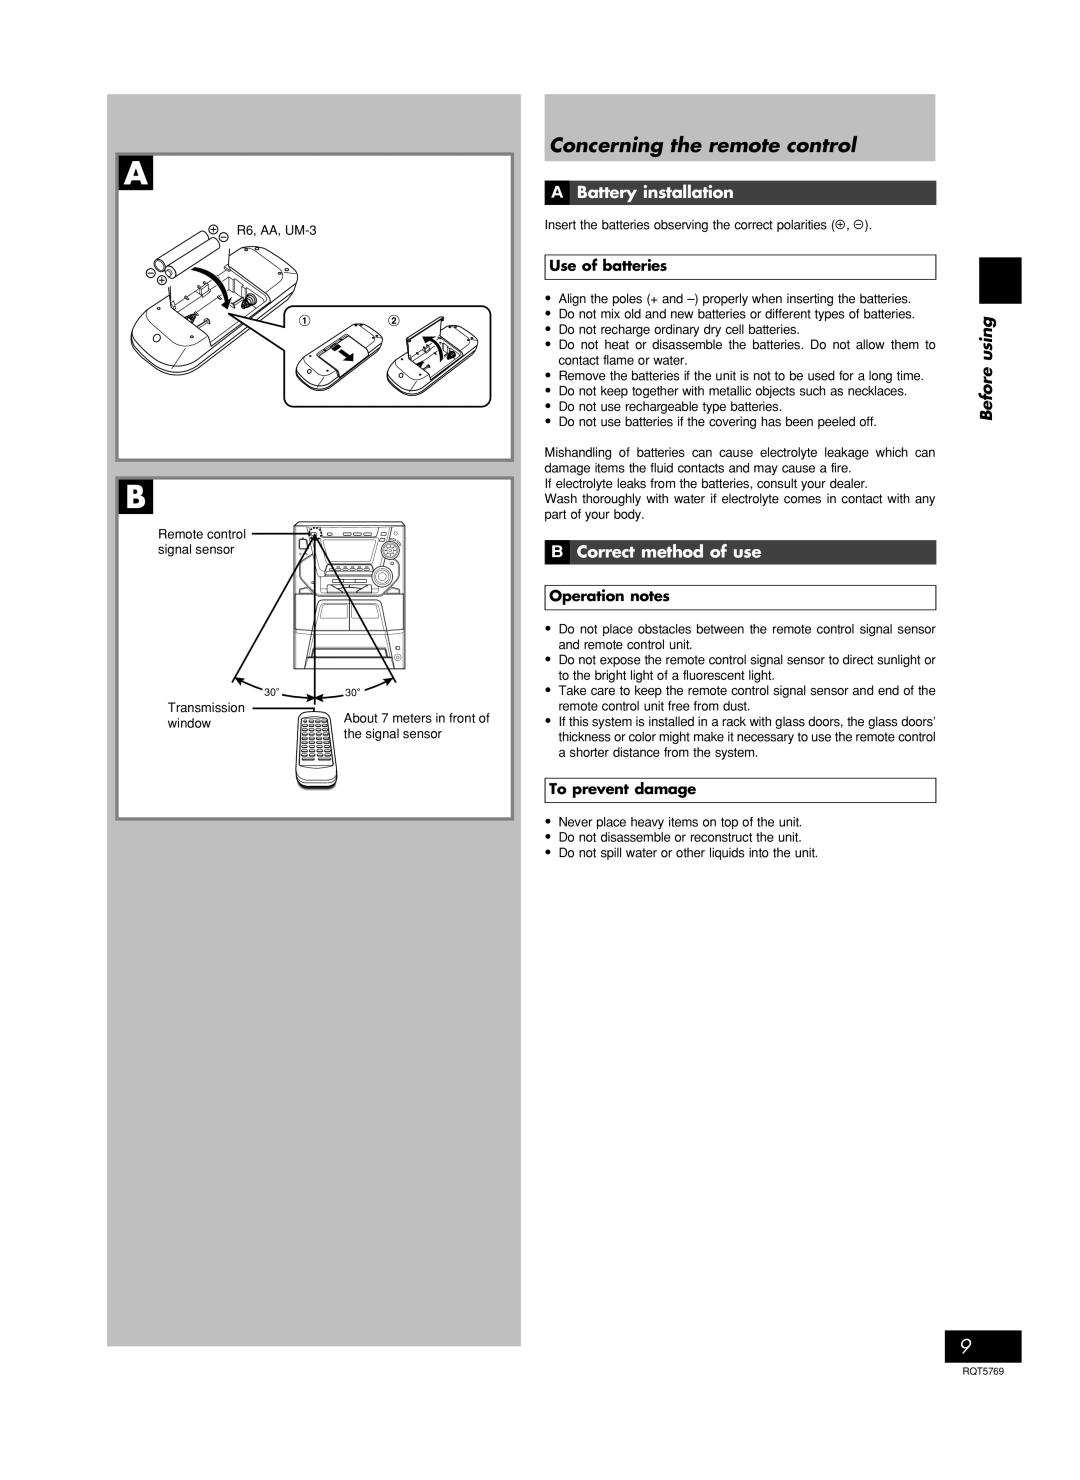 Panasonic SC-AK77 manual Concerning the remote control, A Battery installation, B Correct method of use, Use of batteries 